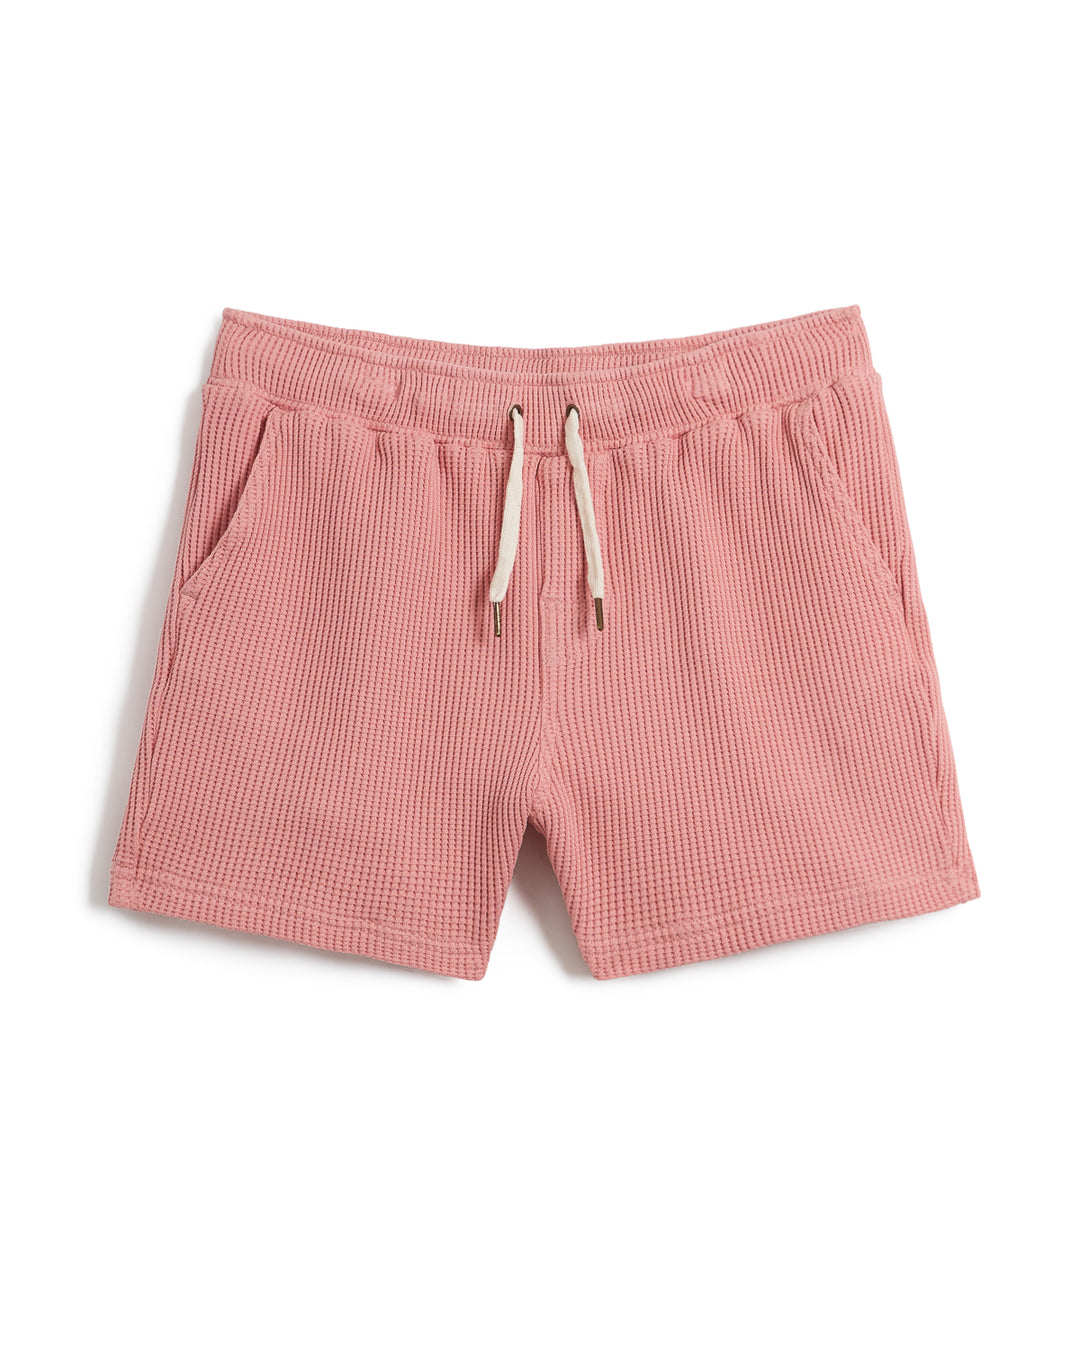 The Cannes Waffle Knit Shorts - Spanish Rose, crafted from waffle knit fabric, features an elastic waistband, drawstring, and side pockets. Laid flat against a white background, these pink shorts are made from 100% cotton for ultimate comfort by Dandy Del Mar.